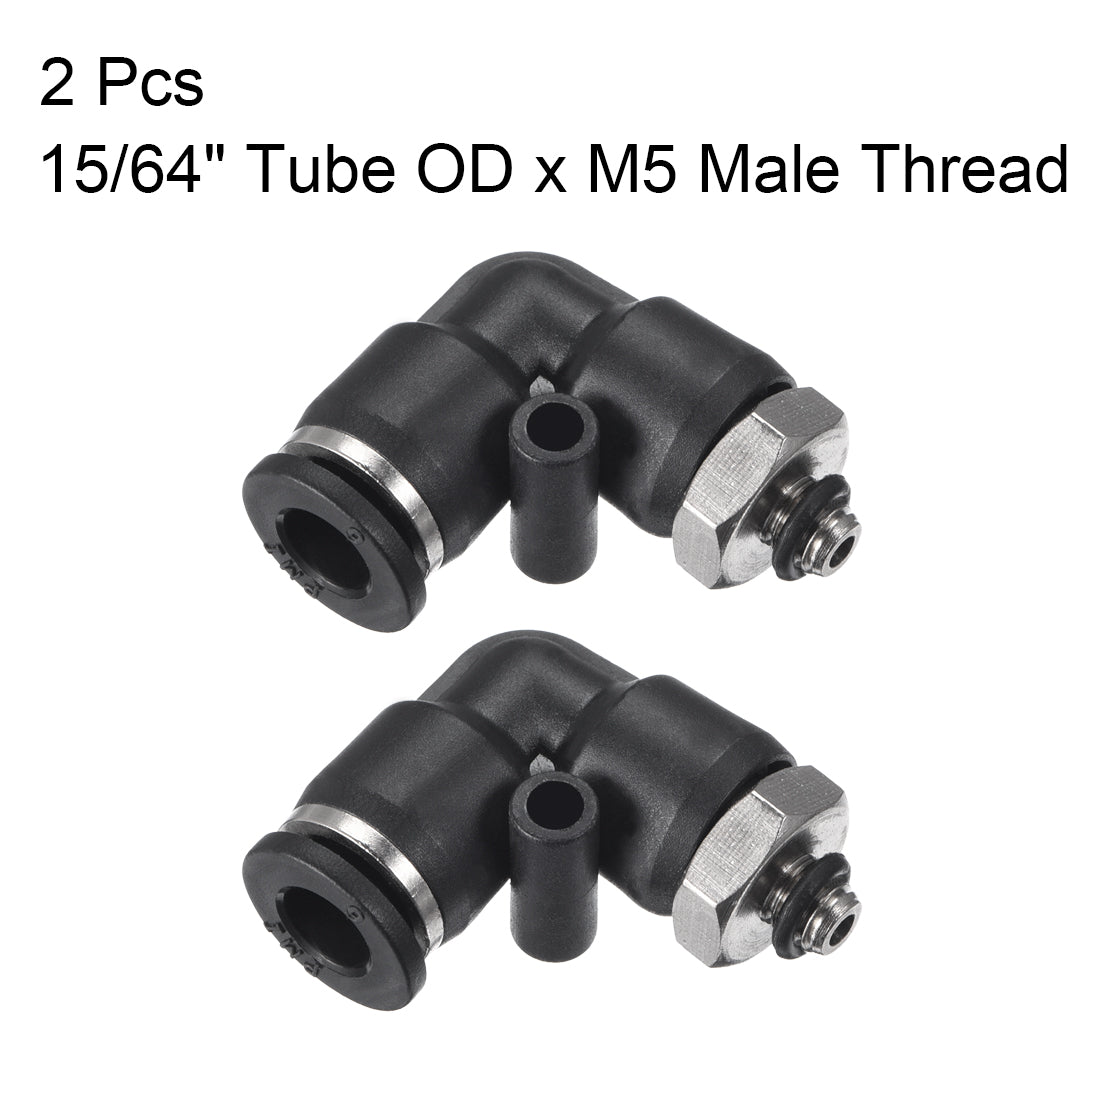 uxcell Uxcell PL6-M5 Pneumatic Push to Connect Fitting, Male Elbow - 15/64" Tube OD x M5 Thread  Tube Fitting 2pcs